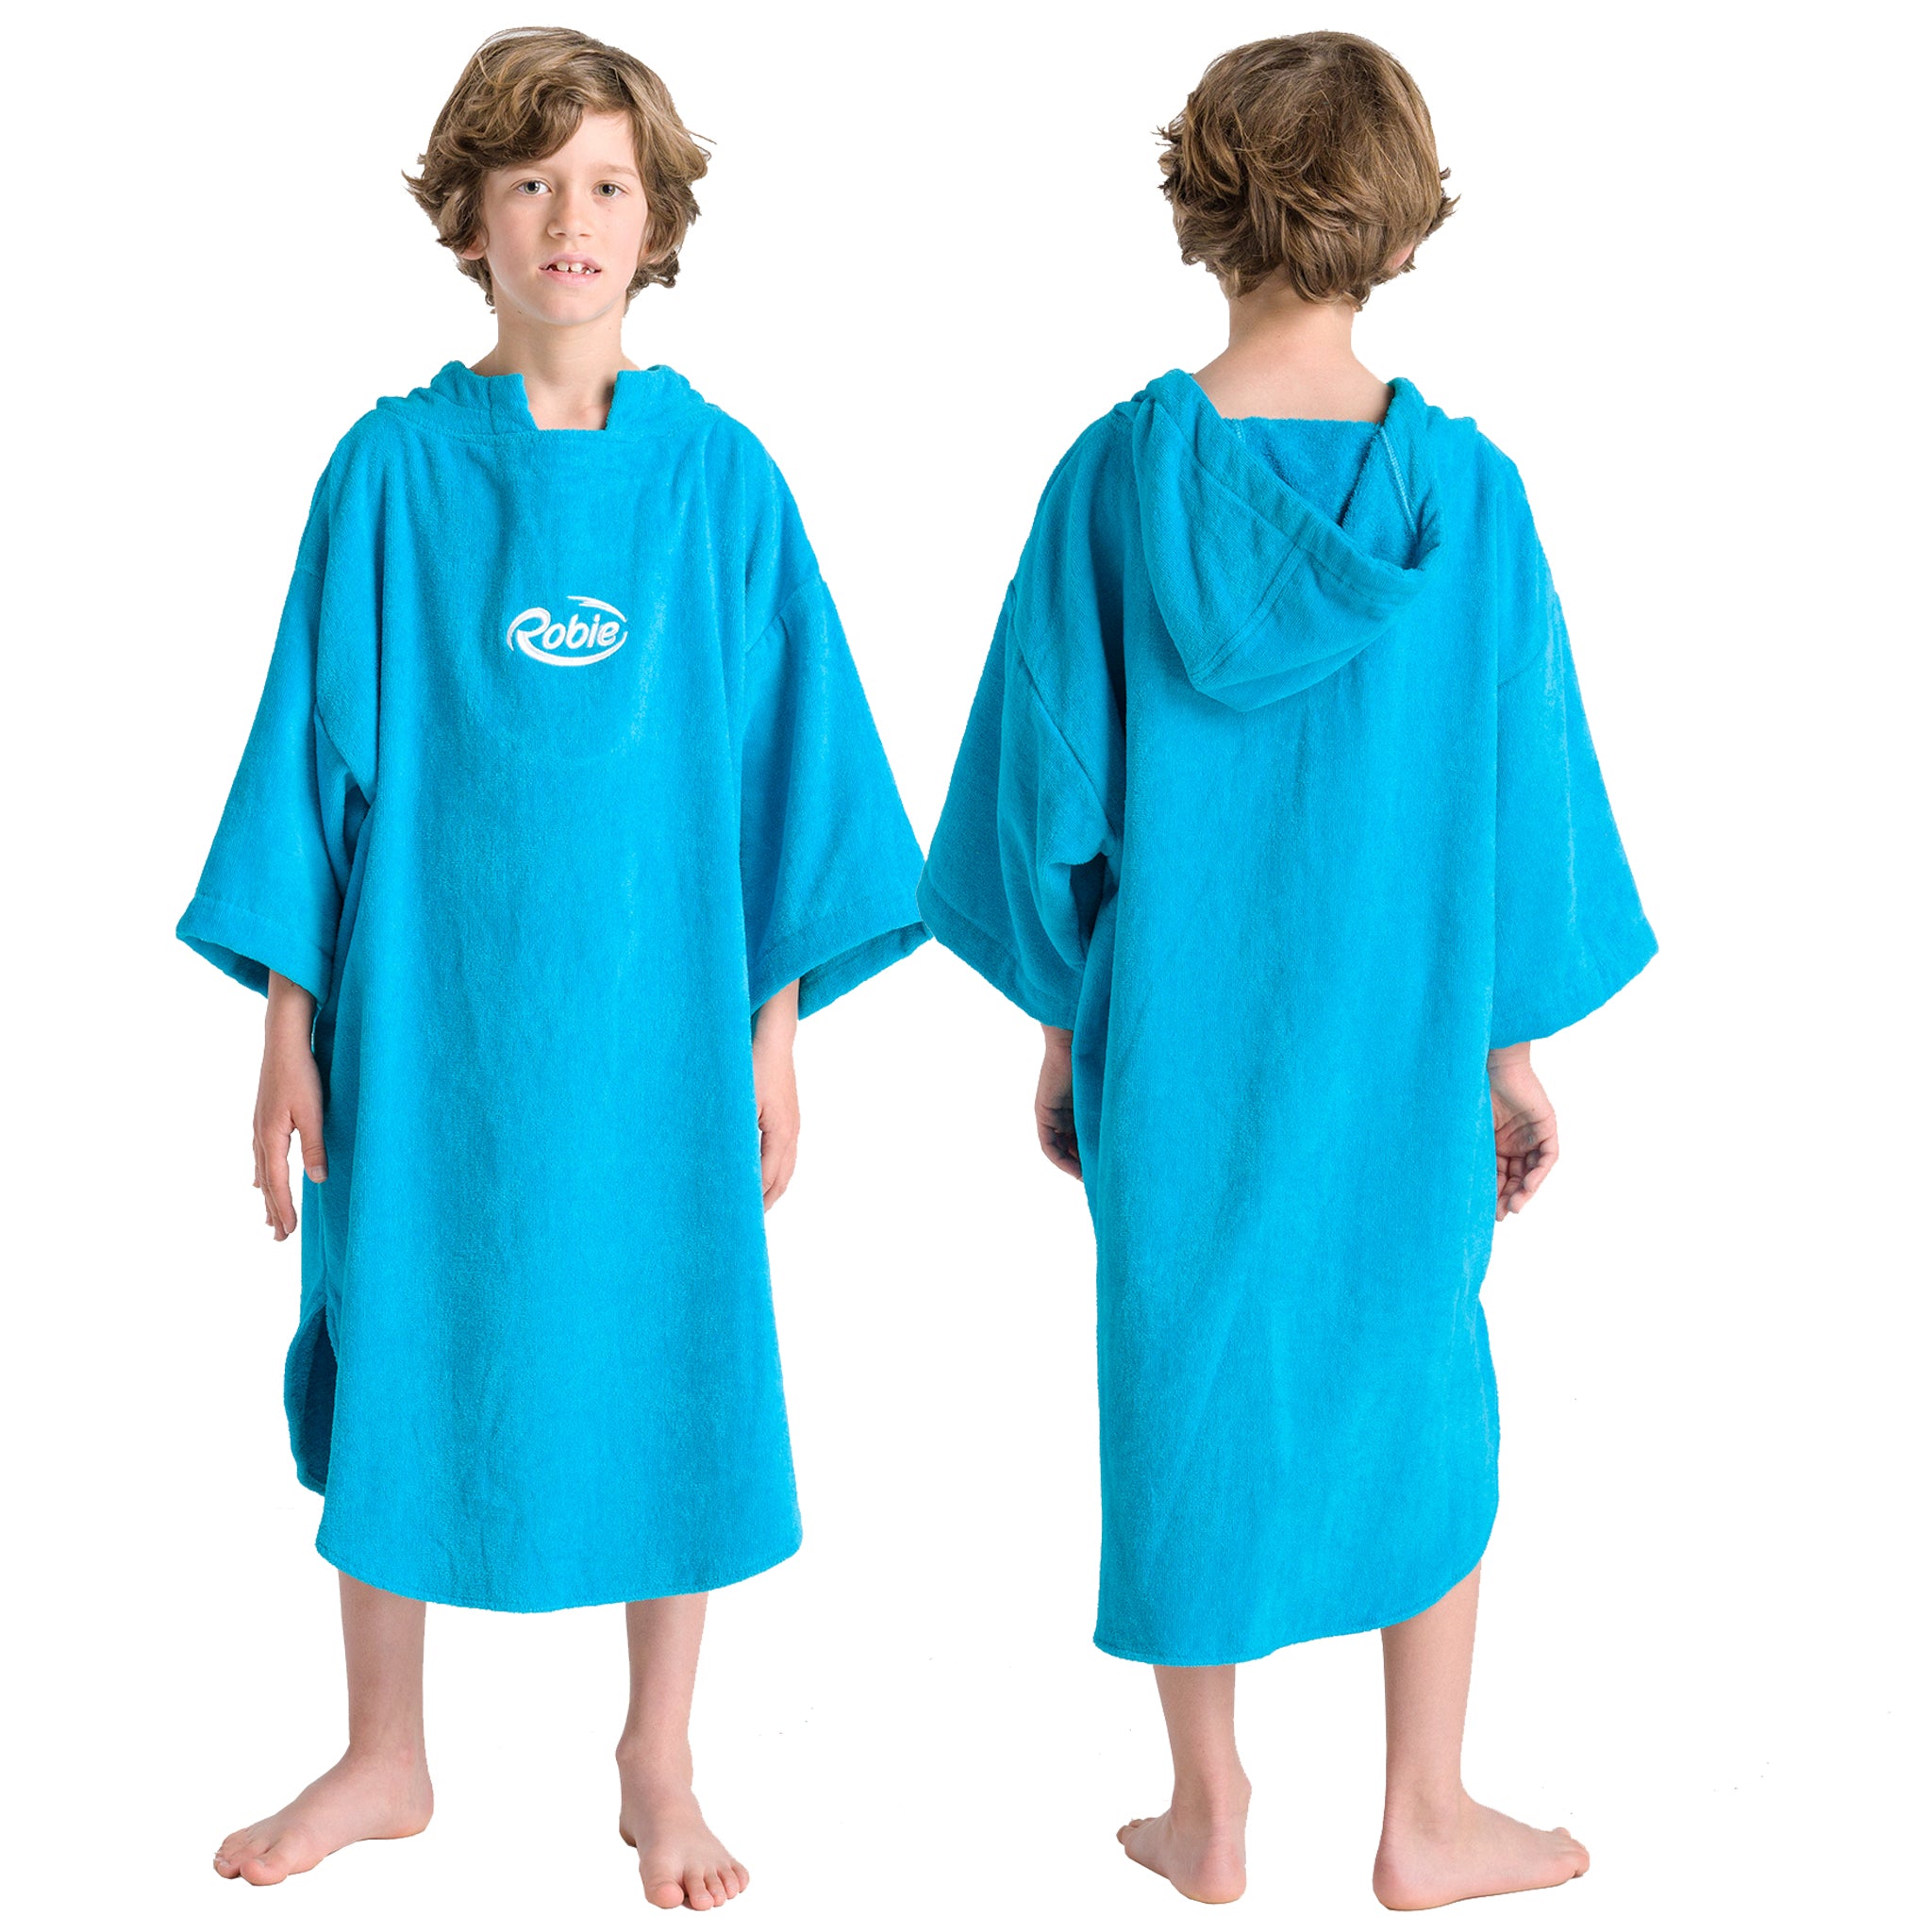 Robie Robes Junior Original Long Sleeve Towelling Beach Changing Poncho - Blue Atoll